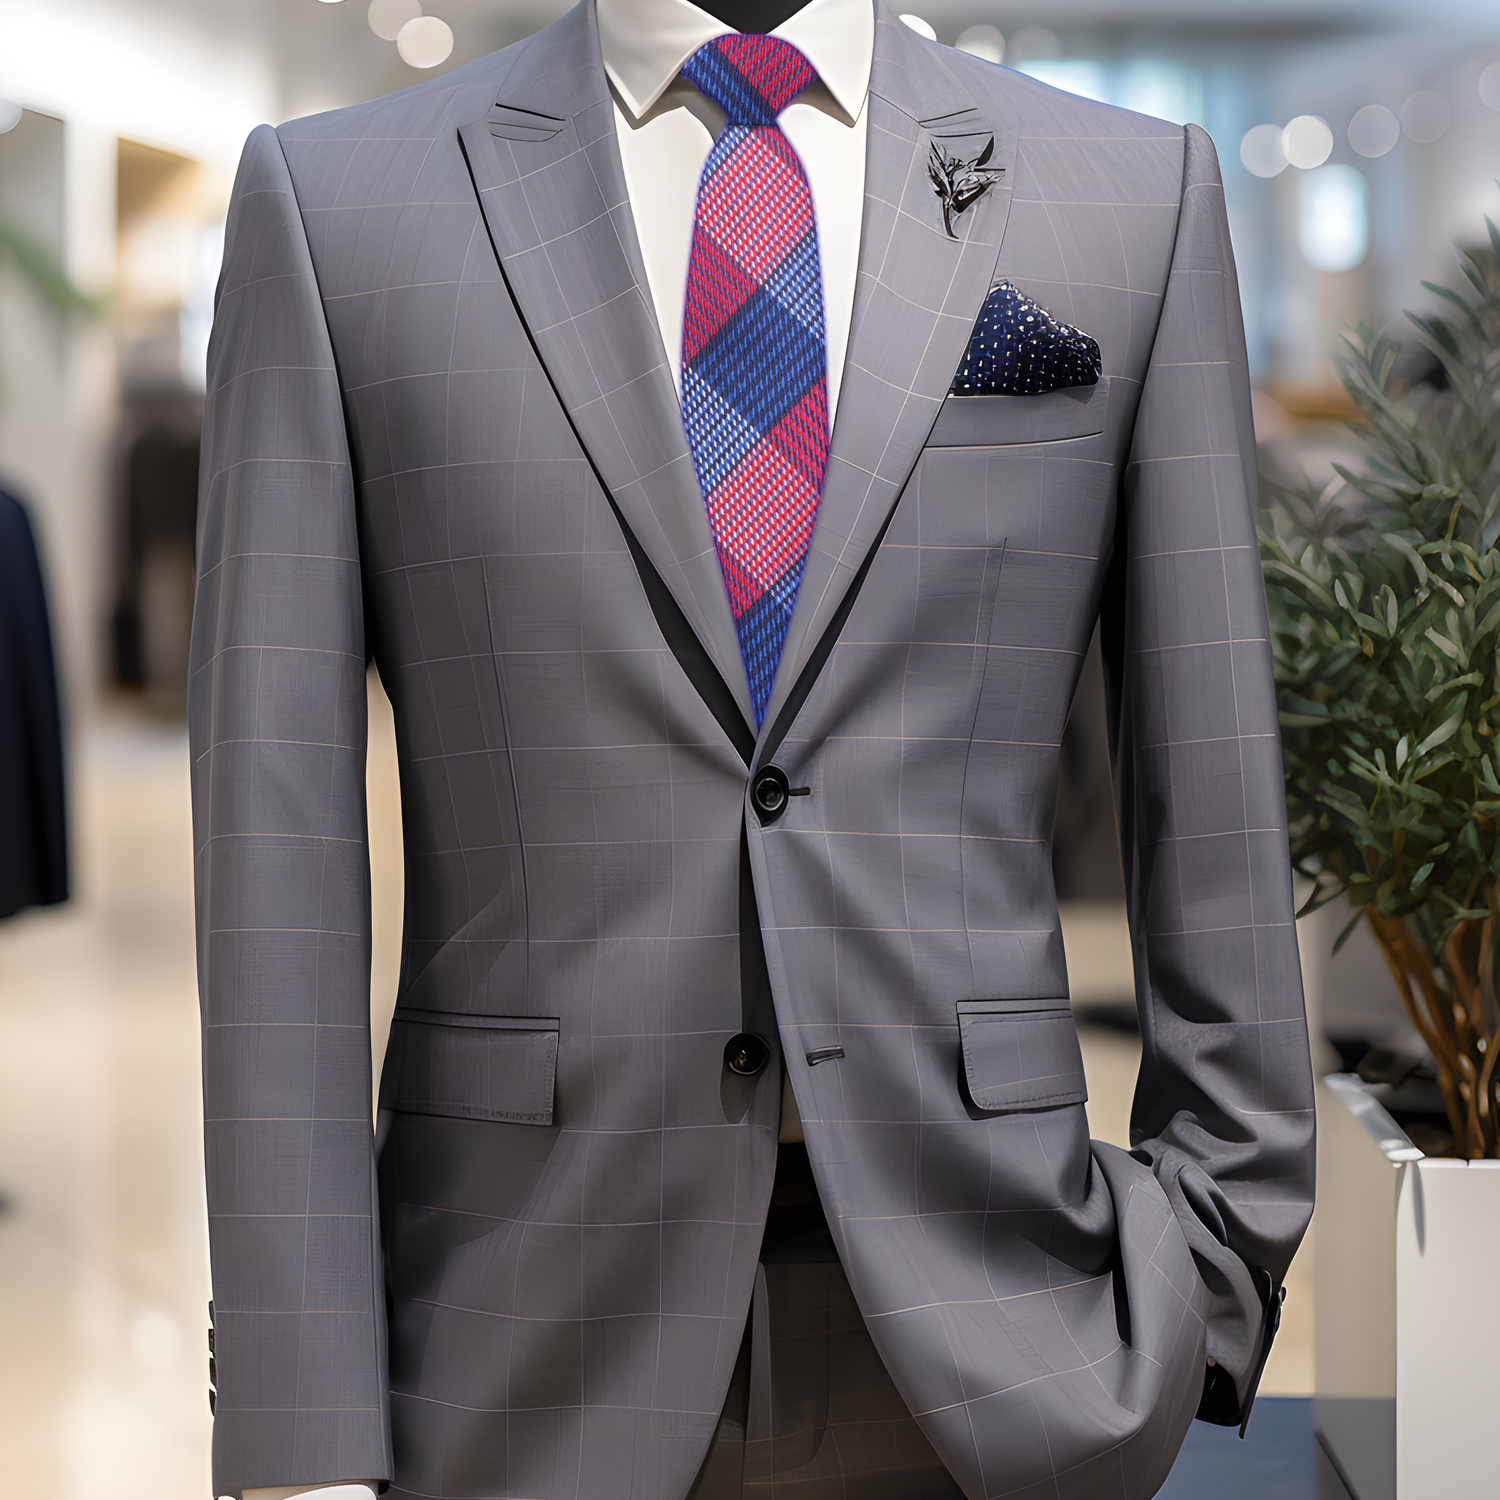 Red and Blue Plaid Tie on Grey Suit